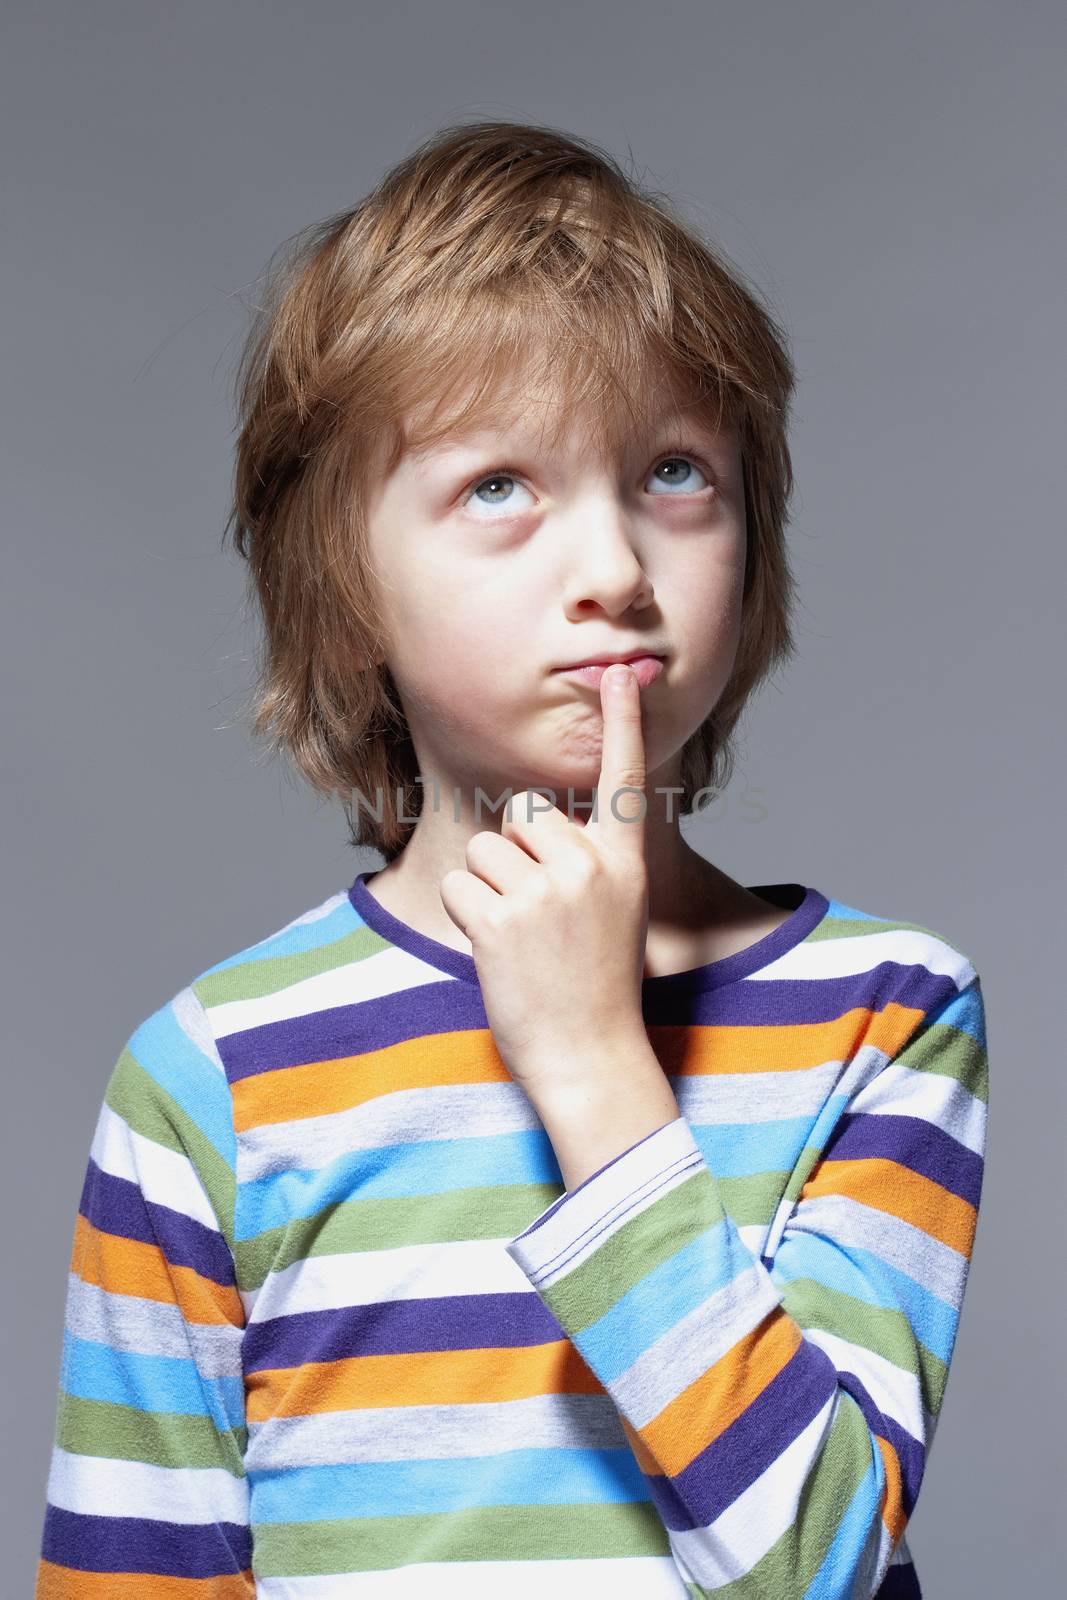 Boy Looking Thinking, Finger on his Mouth - Isolated on Gray